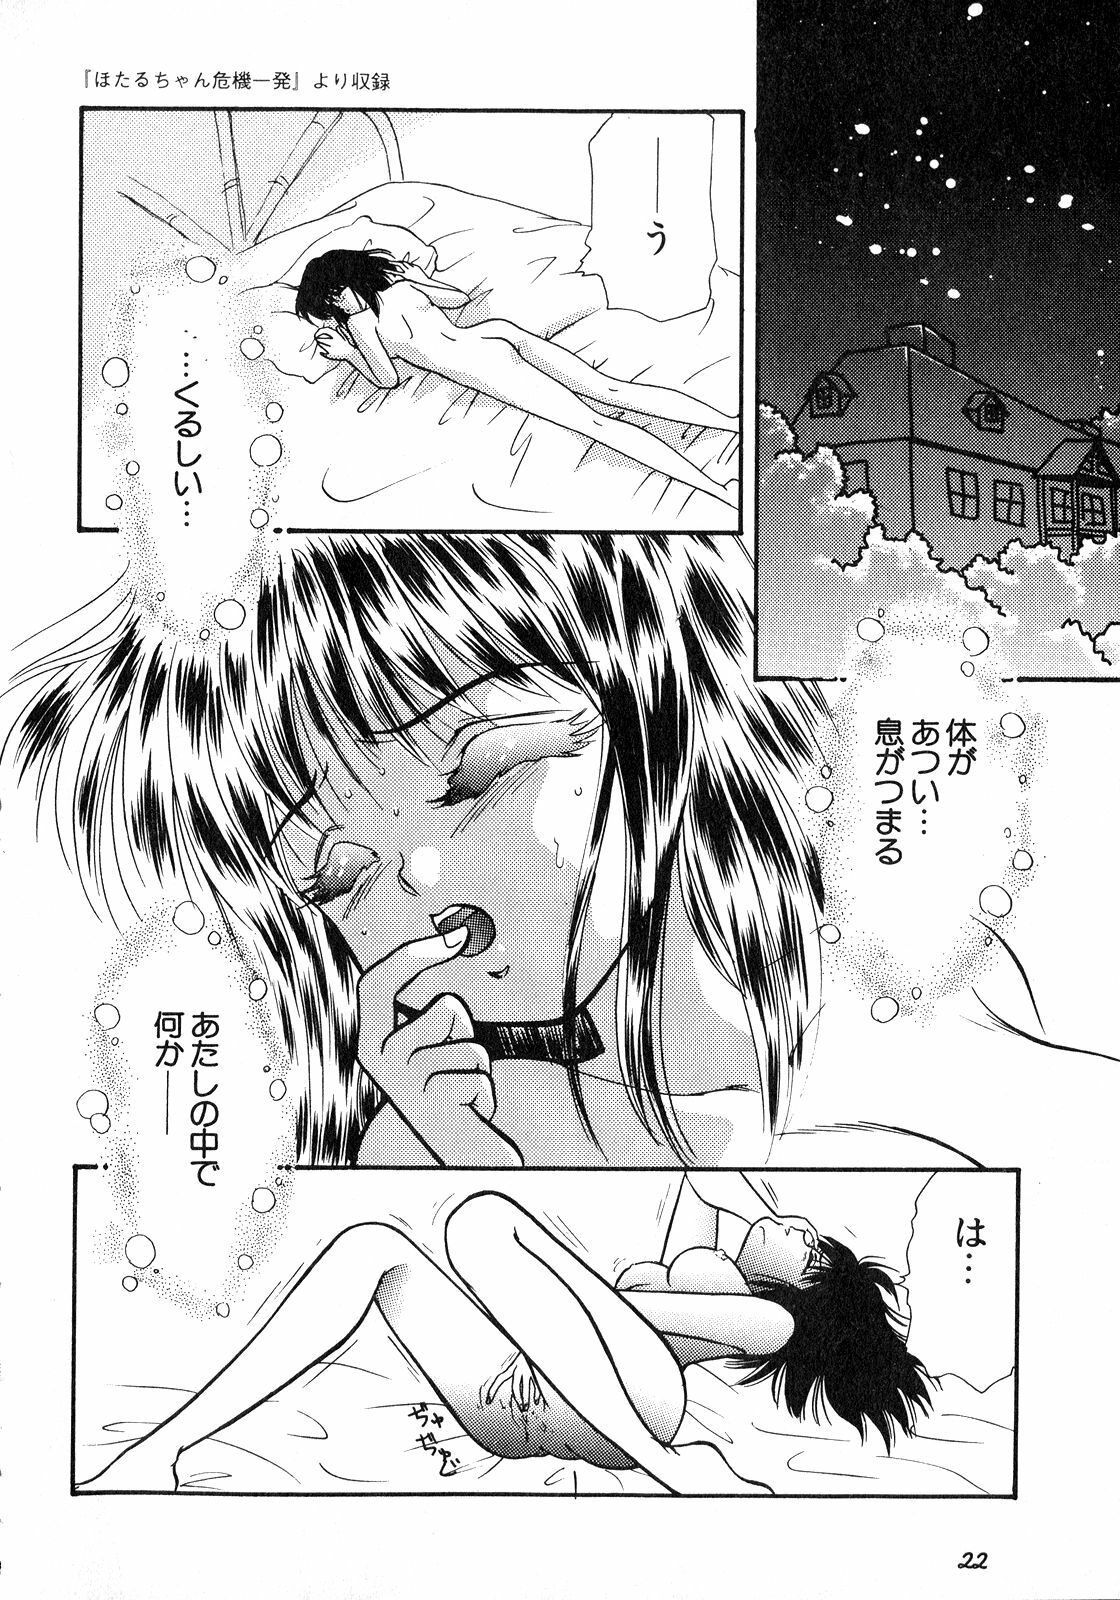 [Anthology] Lunatic Party 8 (Sailor Moon) page 23 full